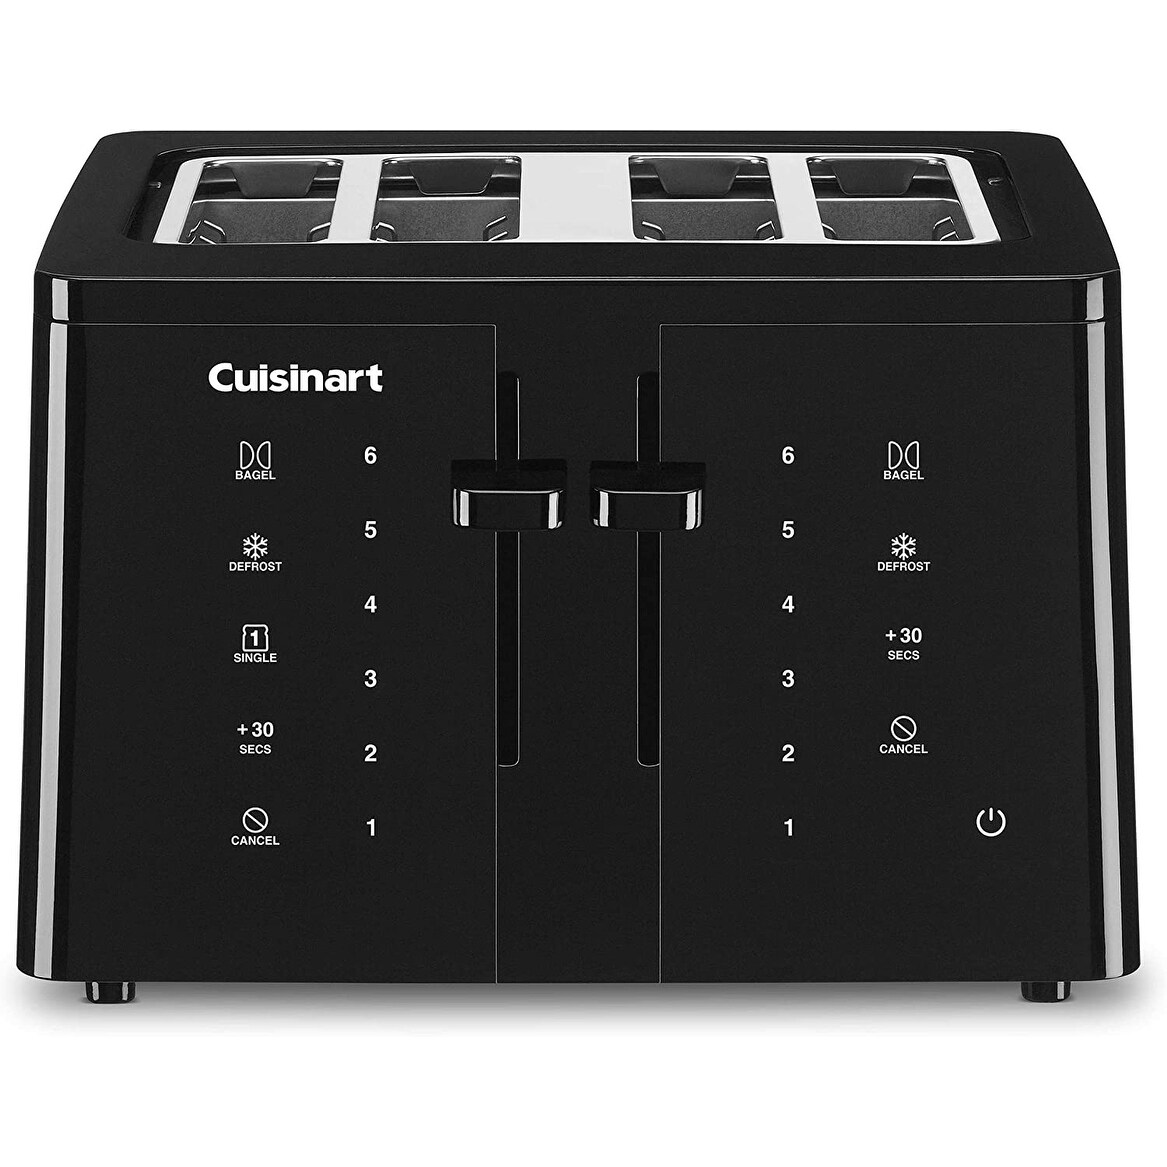 https://ak1.ostkcdn.com/images/products/is/images/direct/9ddd979c61912d9905c33cba7a9a05c36fd54df1/Cuisinart-CPT-T40-Touchscreen%2C-4-Slice-Toaster%2C-Black.jpg